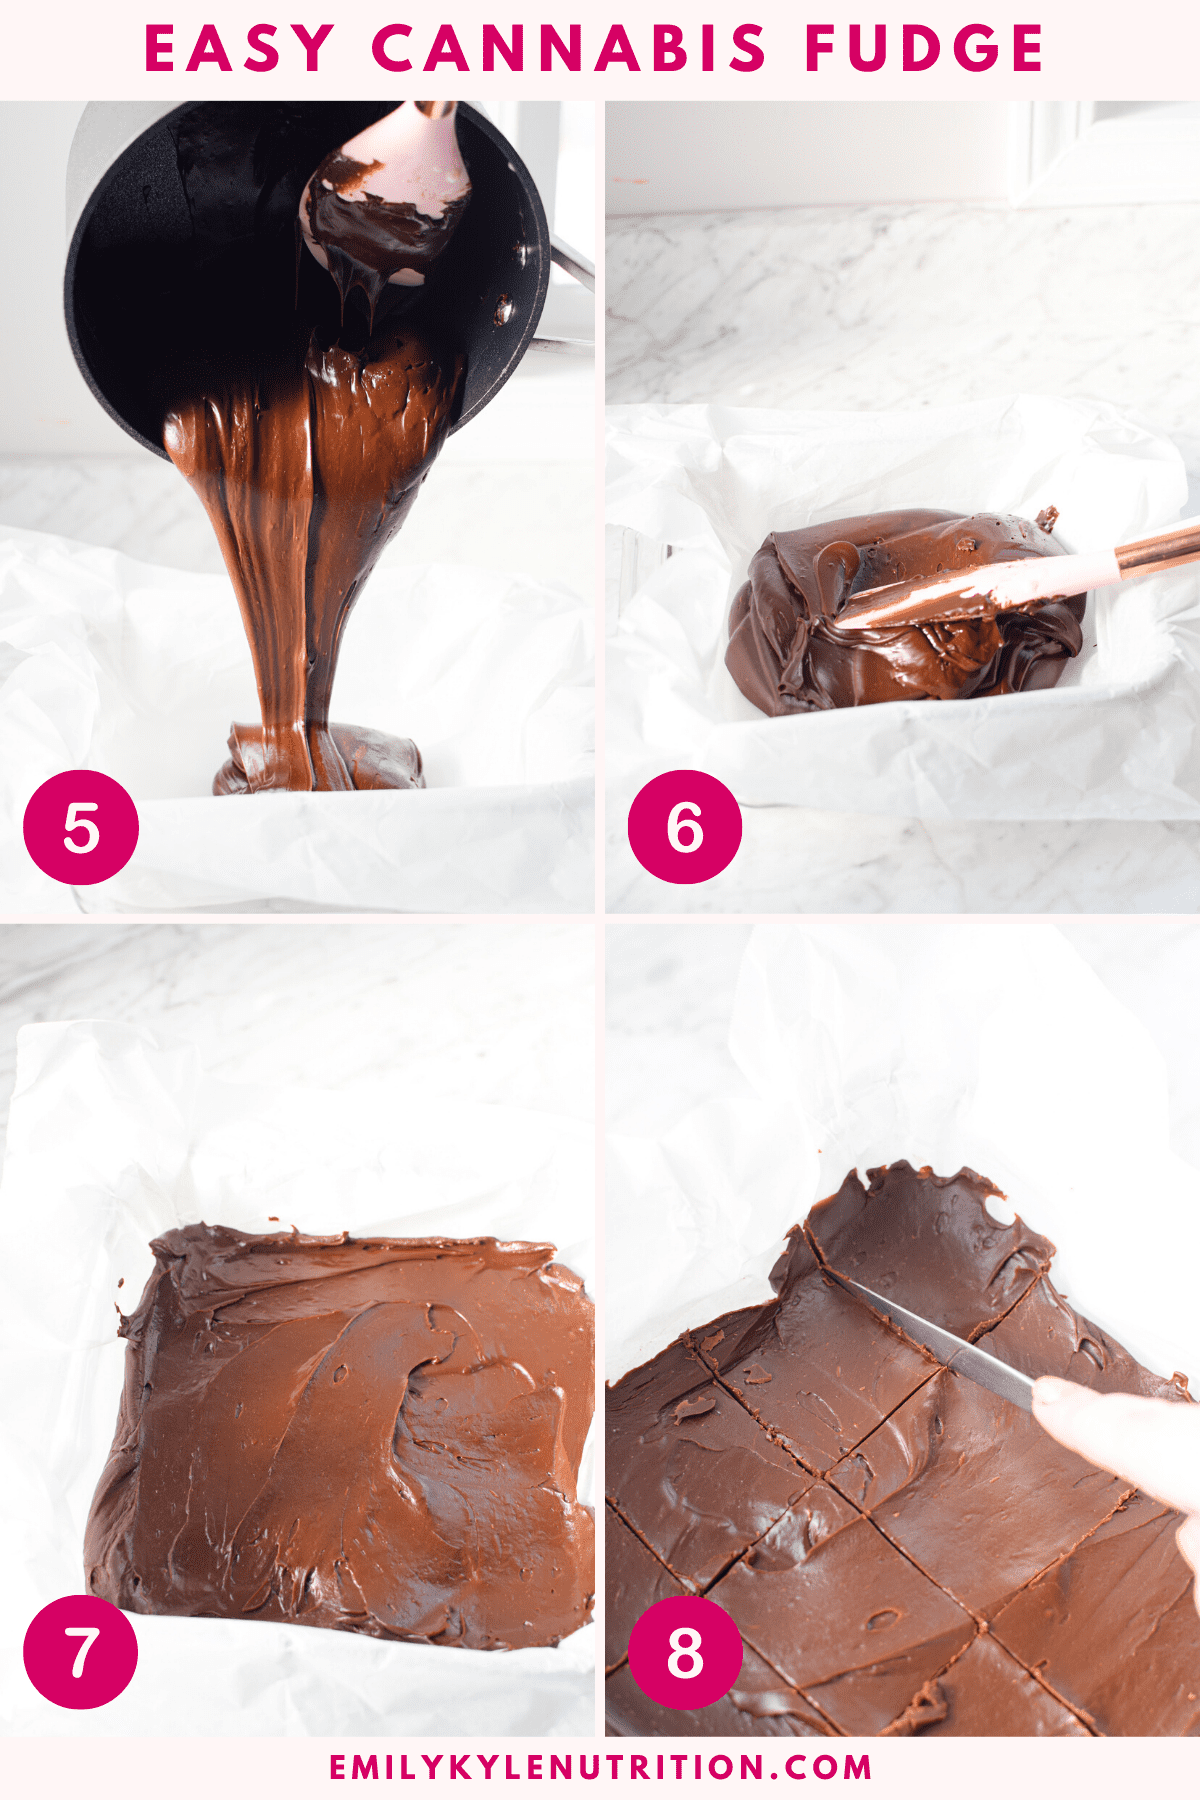 A four step image collage showing the steps to making cannabis fudge.